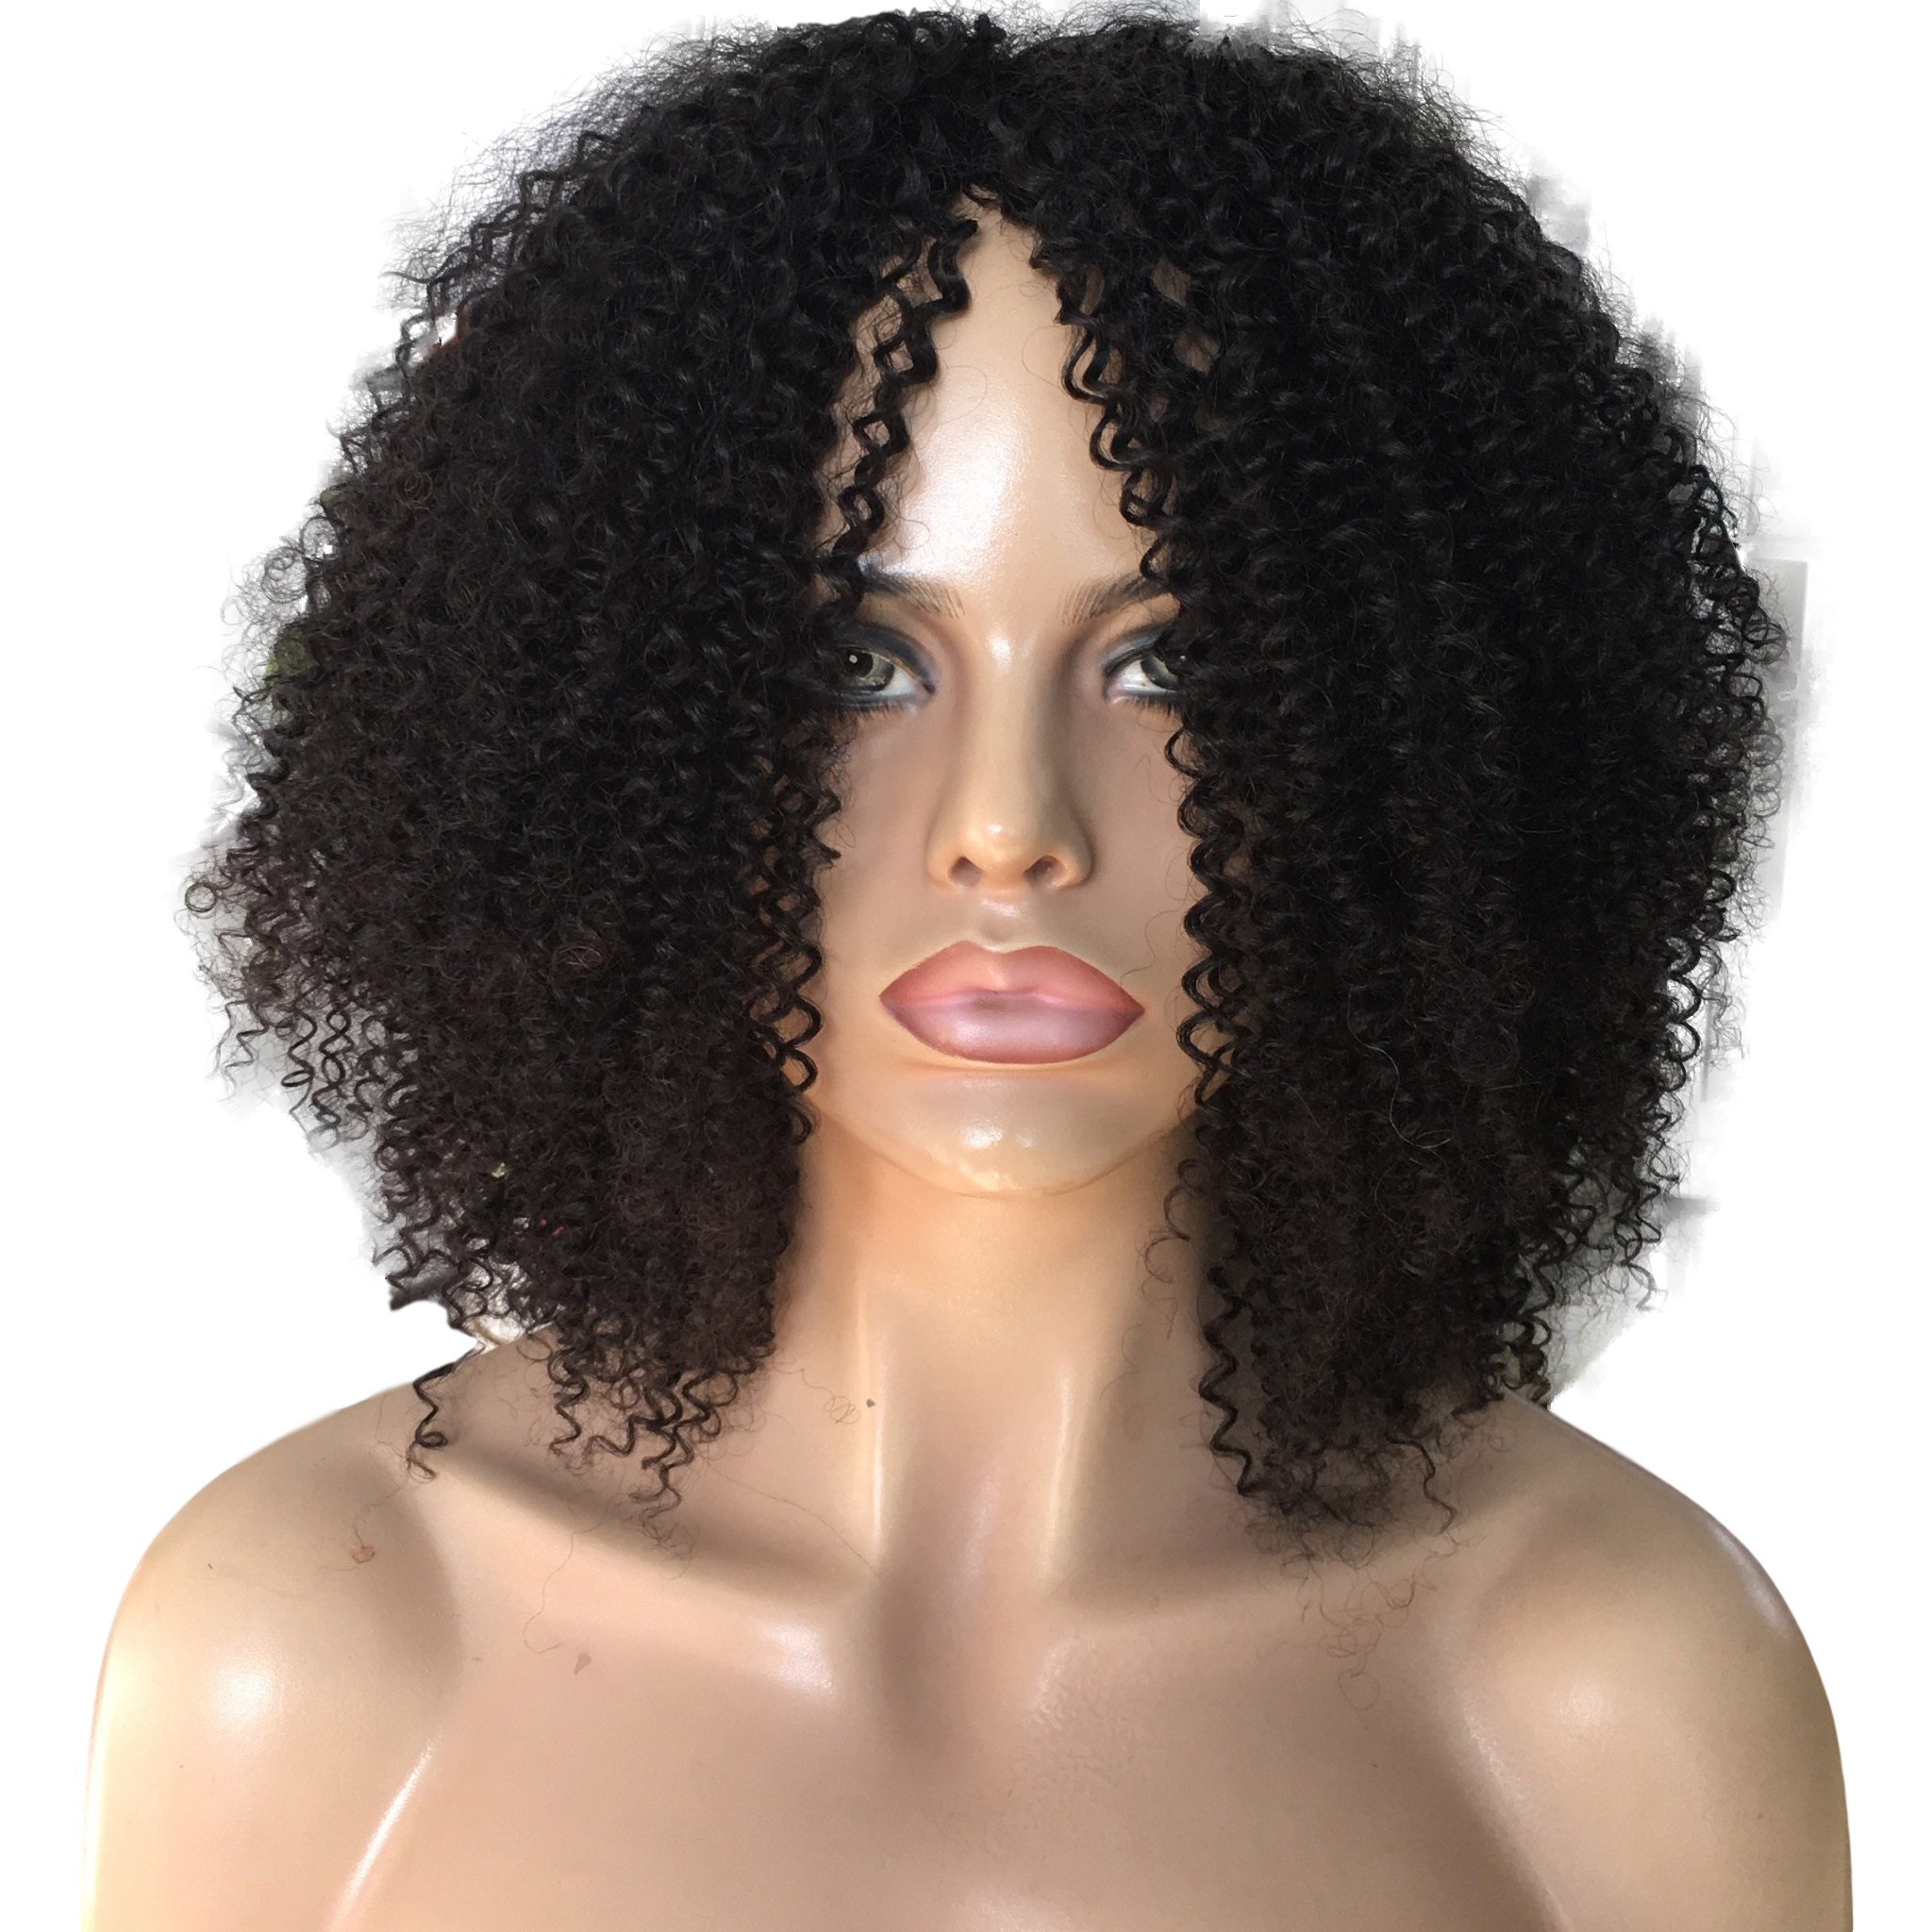 Tavia Lace Front Wig